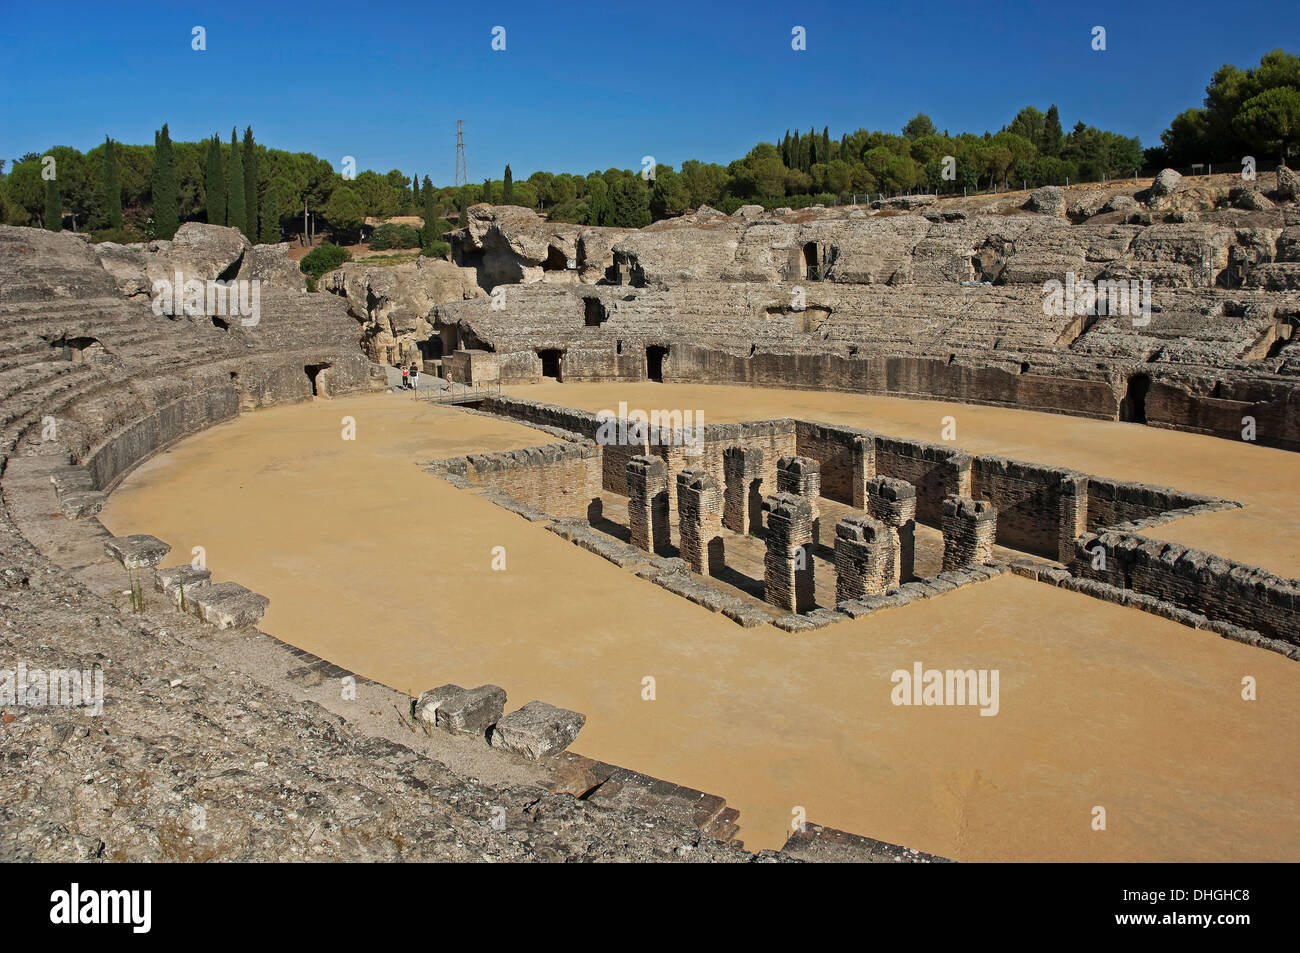 Amphitheater, Roman ruins of Italica - 2nd century, Santiponce, Seville-province, Region of Andalusia, Spain, Europe Stock Photo